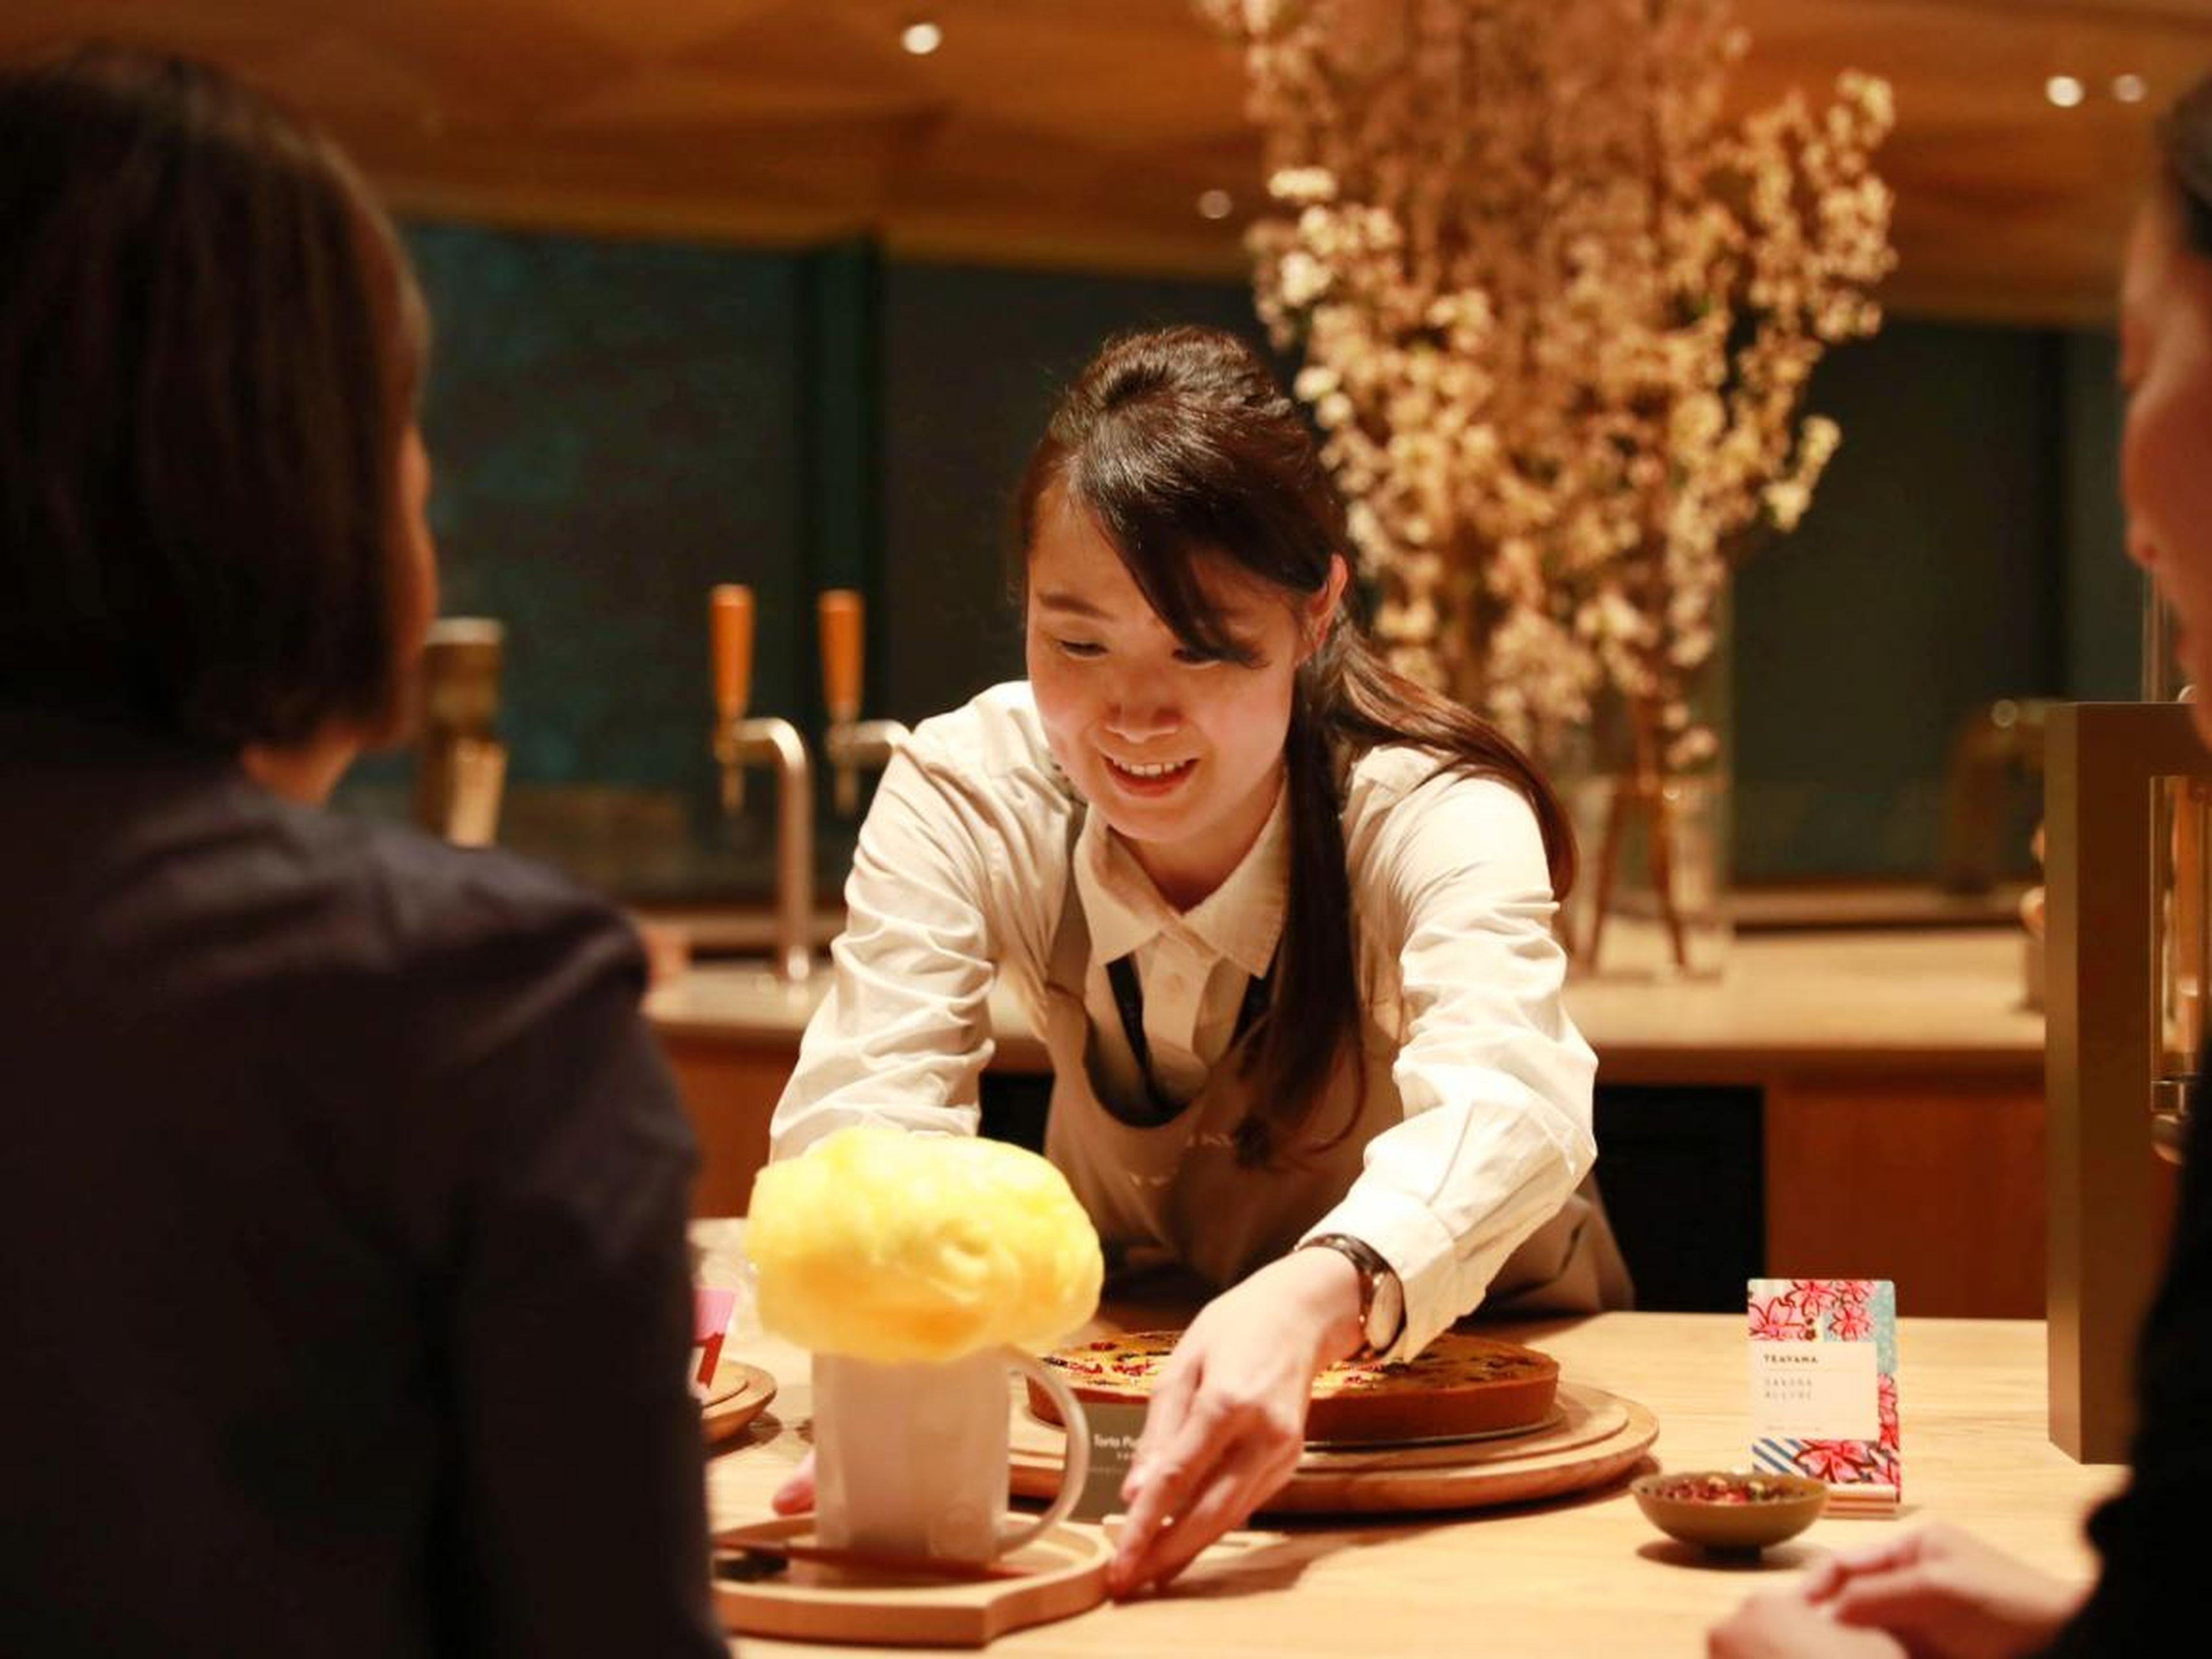 The Roastery is home to the largest Teavana Bar in the world, featuring tea-centric drinks such as the Golden-Sky Black Tea Latte, which is topped with turmeric cotton candy.